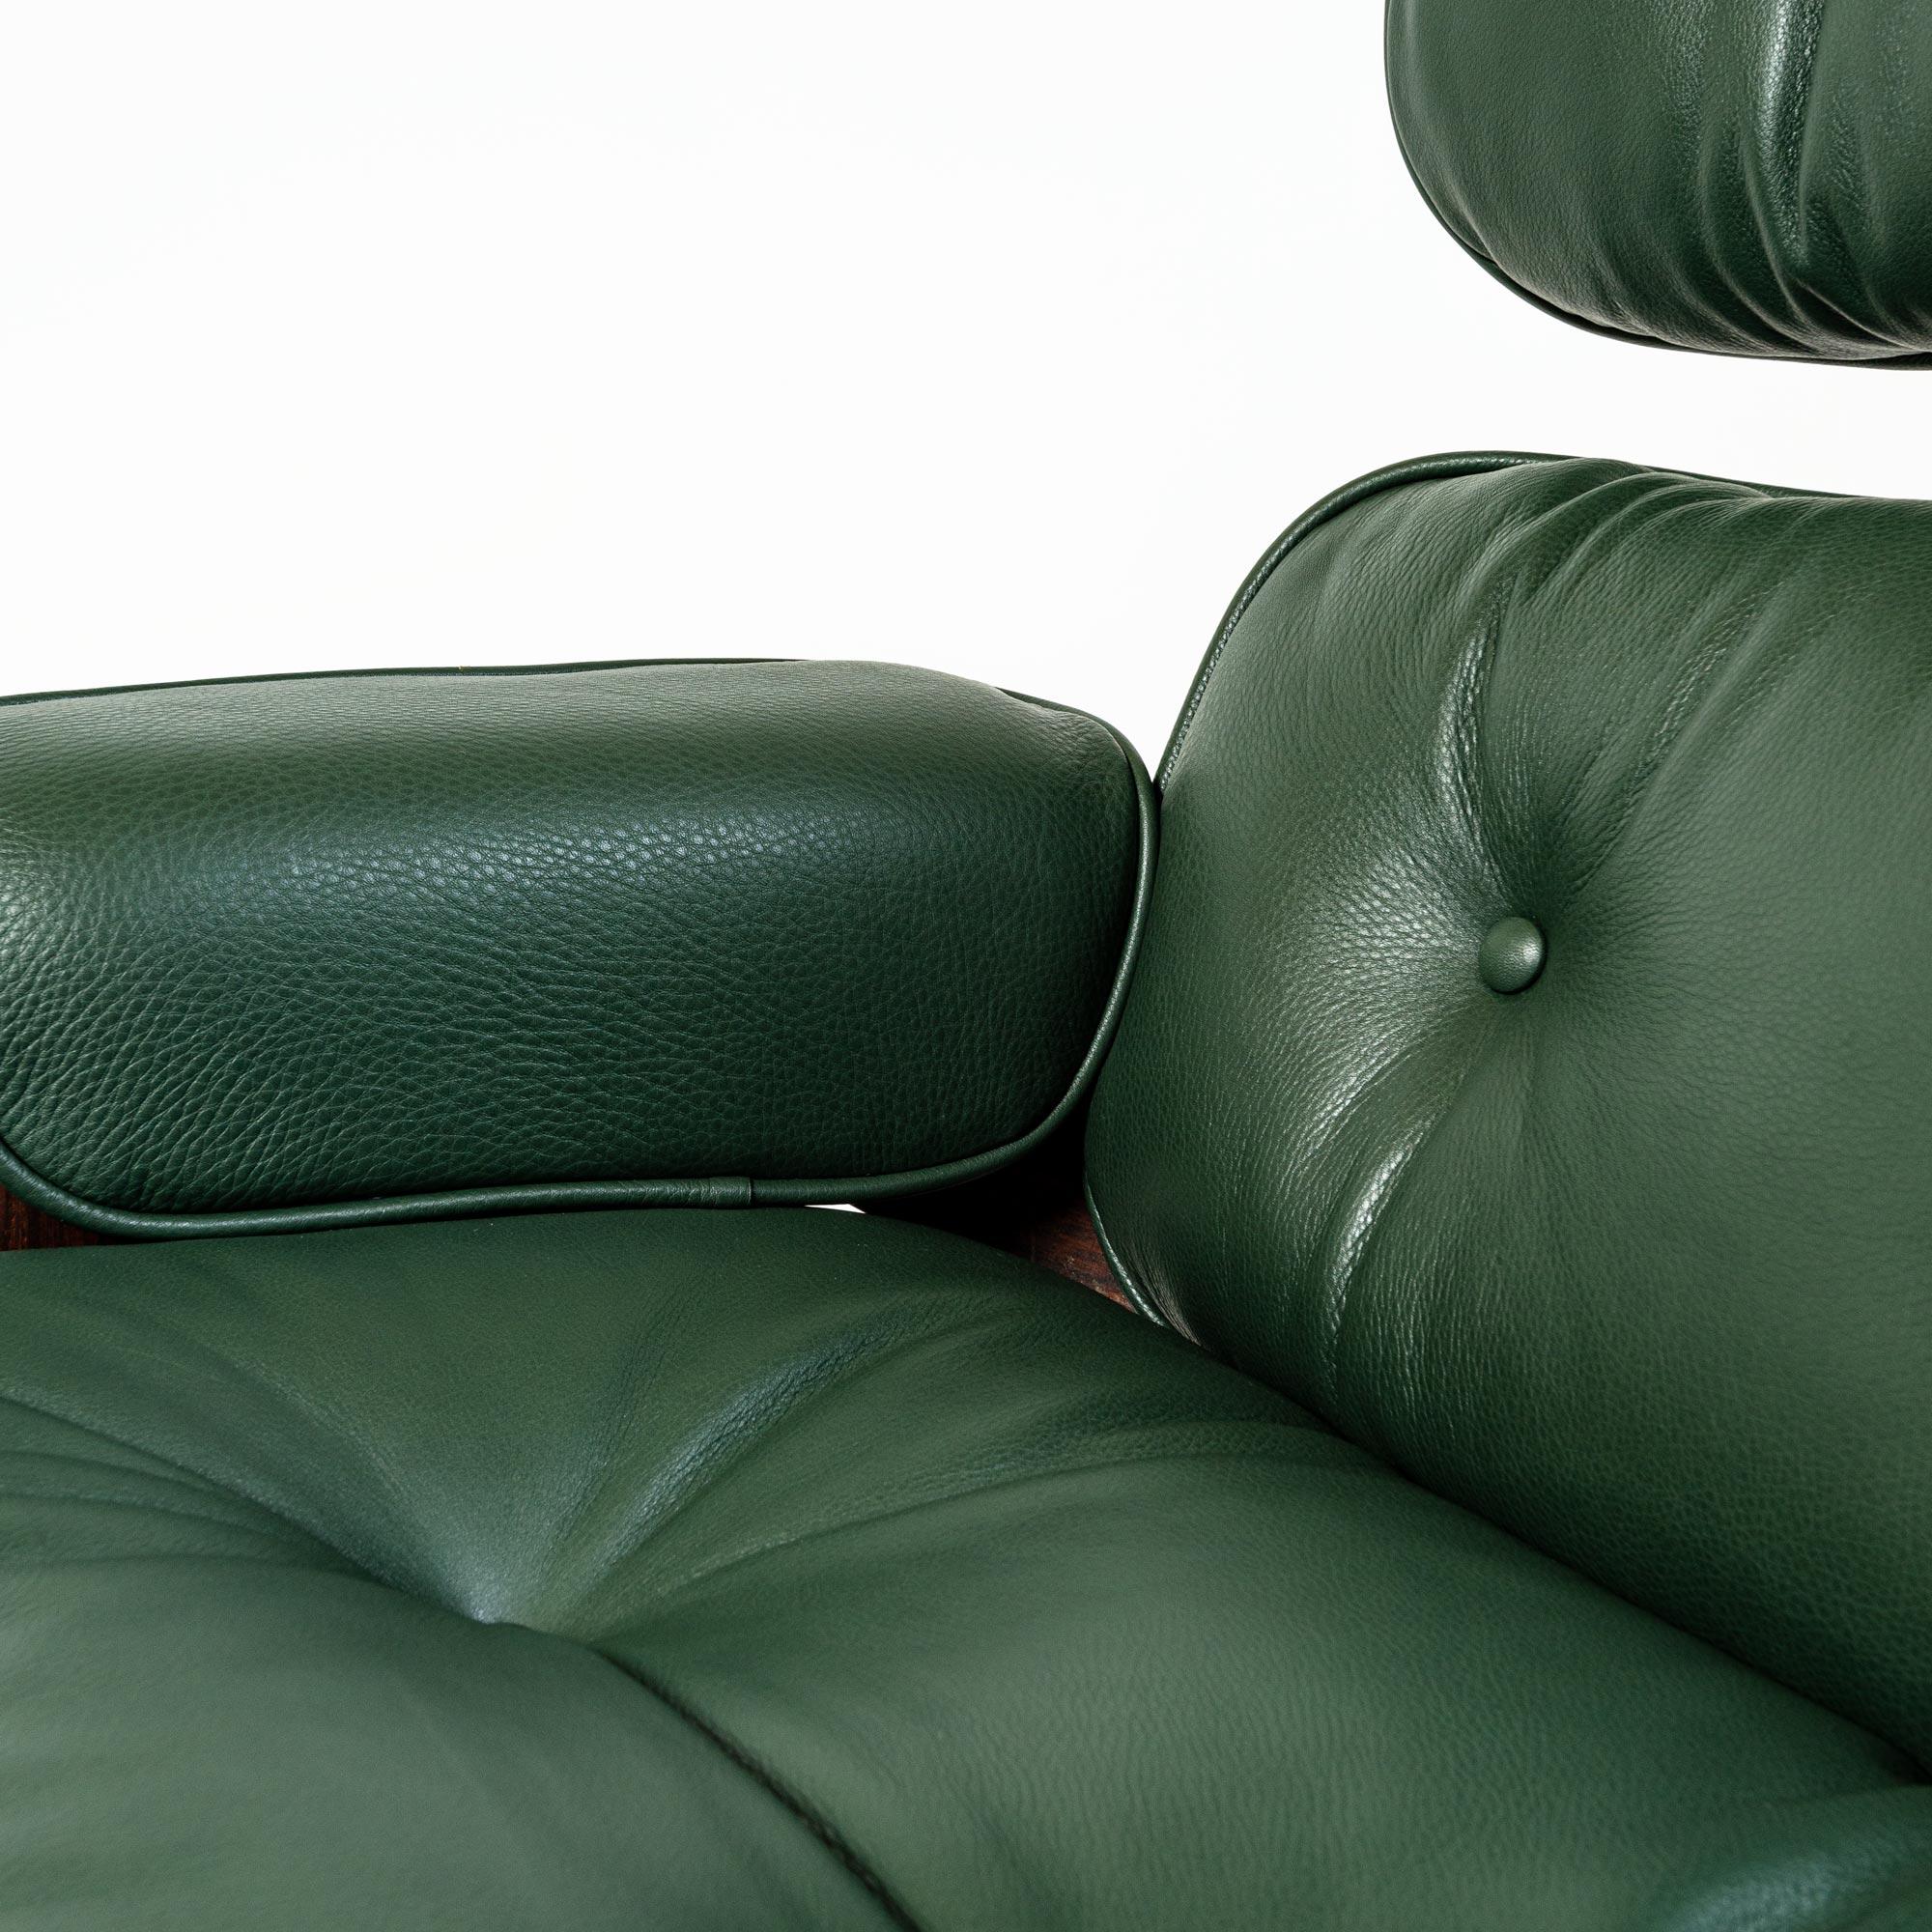 Mid-Century Modern 3rd Gen Eames Lounge Chair 670-671 in Elmo Baltique Forest Green Leather